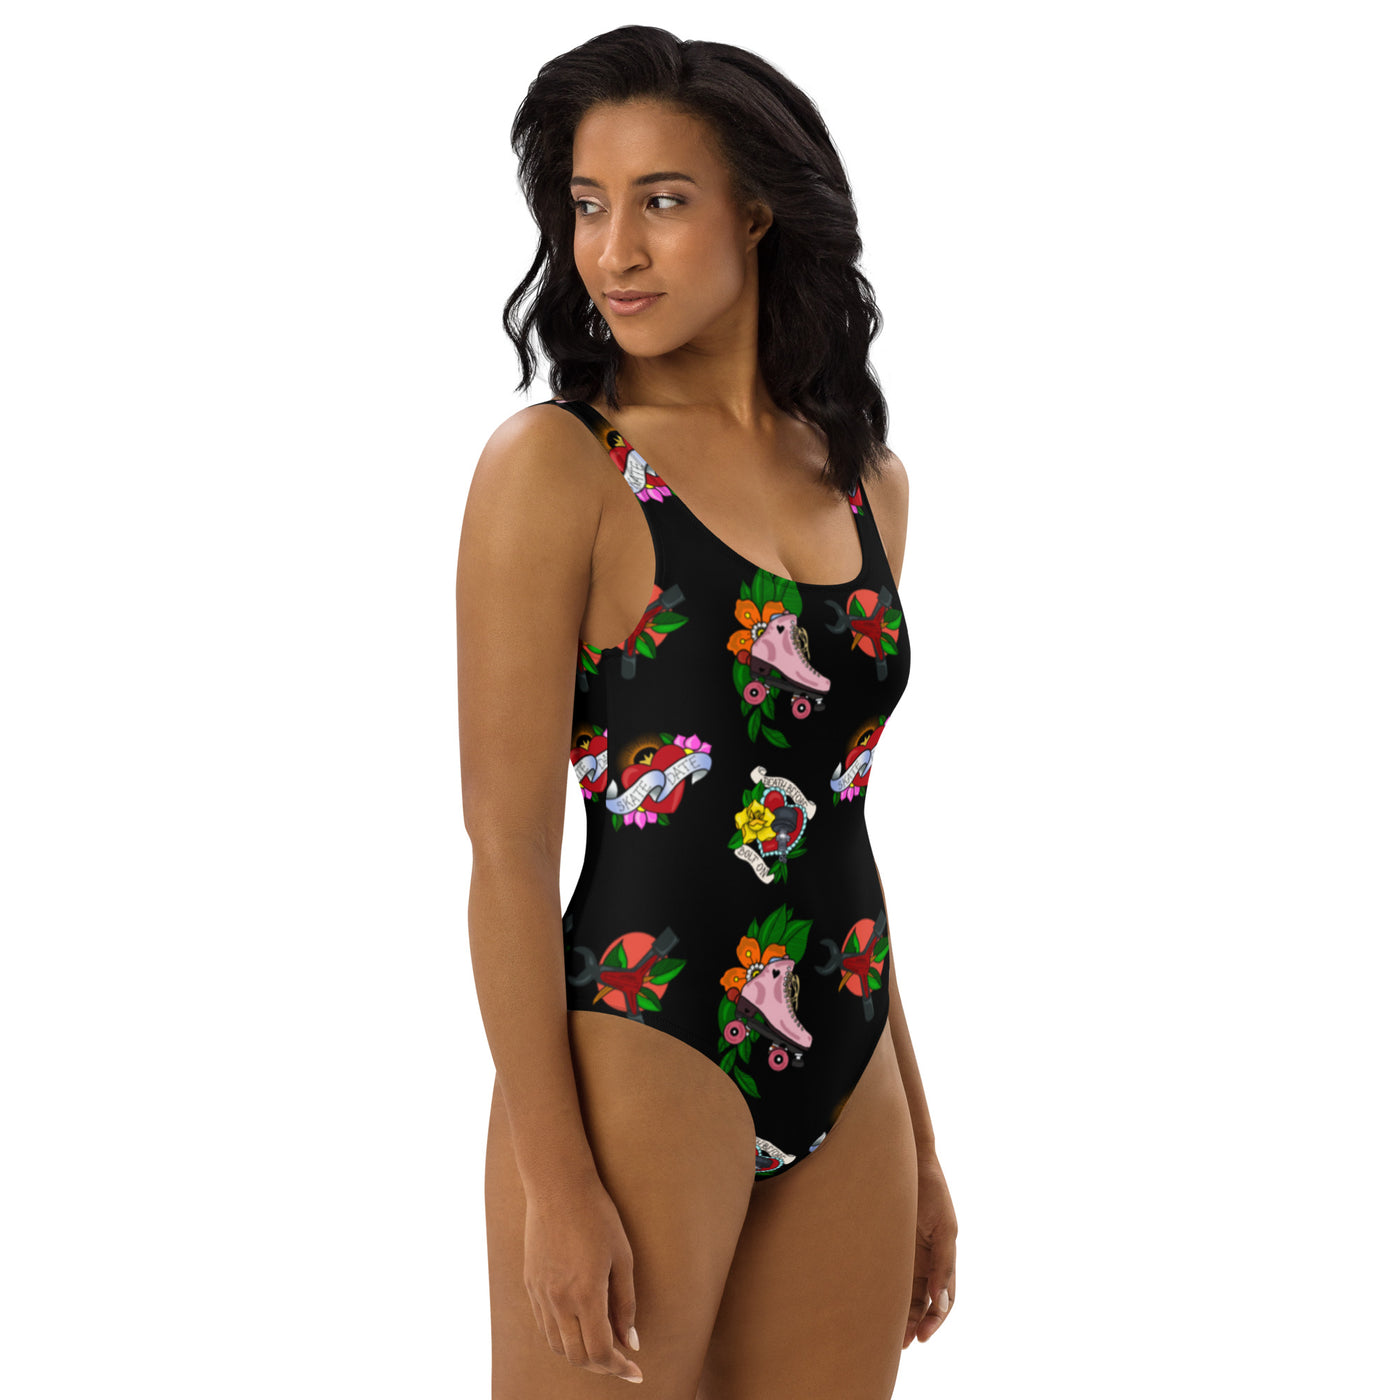 Skate Ink One-Piece Swimsuit